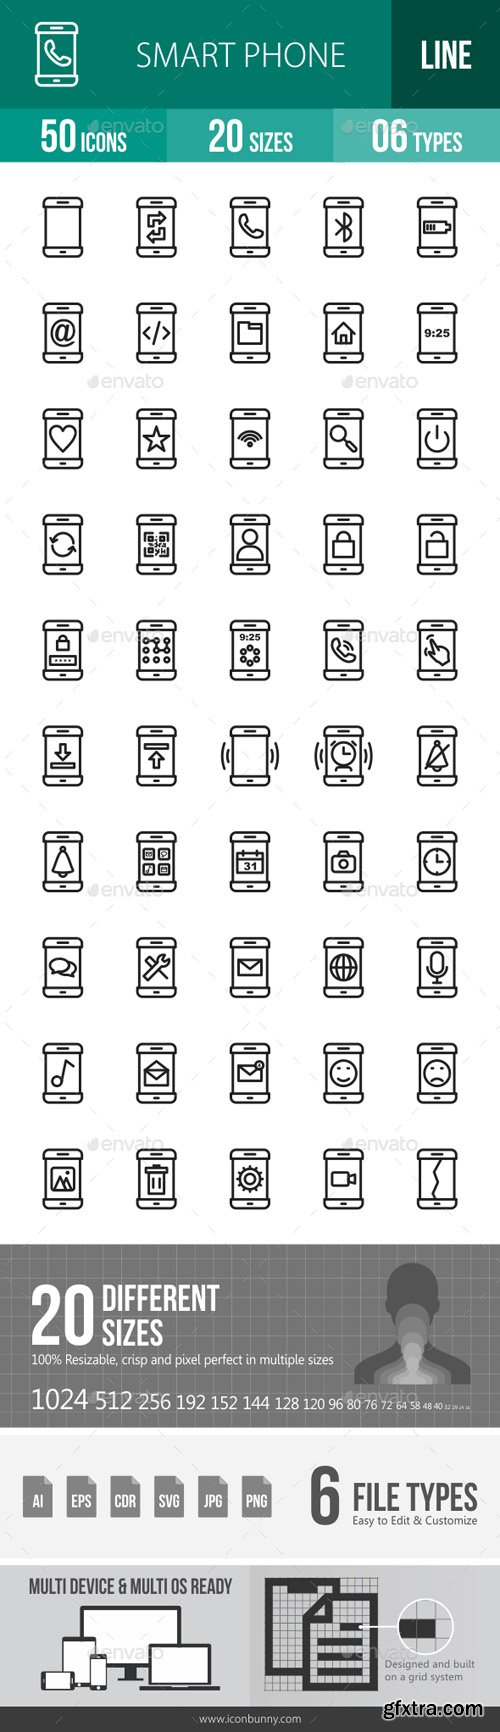 GR - Smartphone Line Icons 17953438